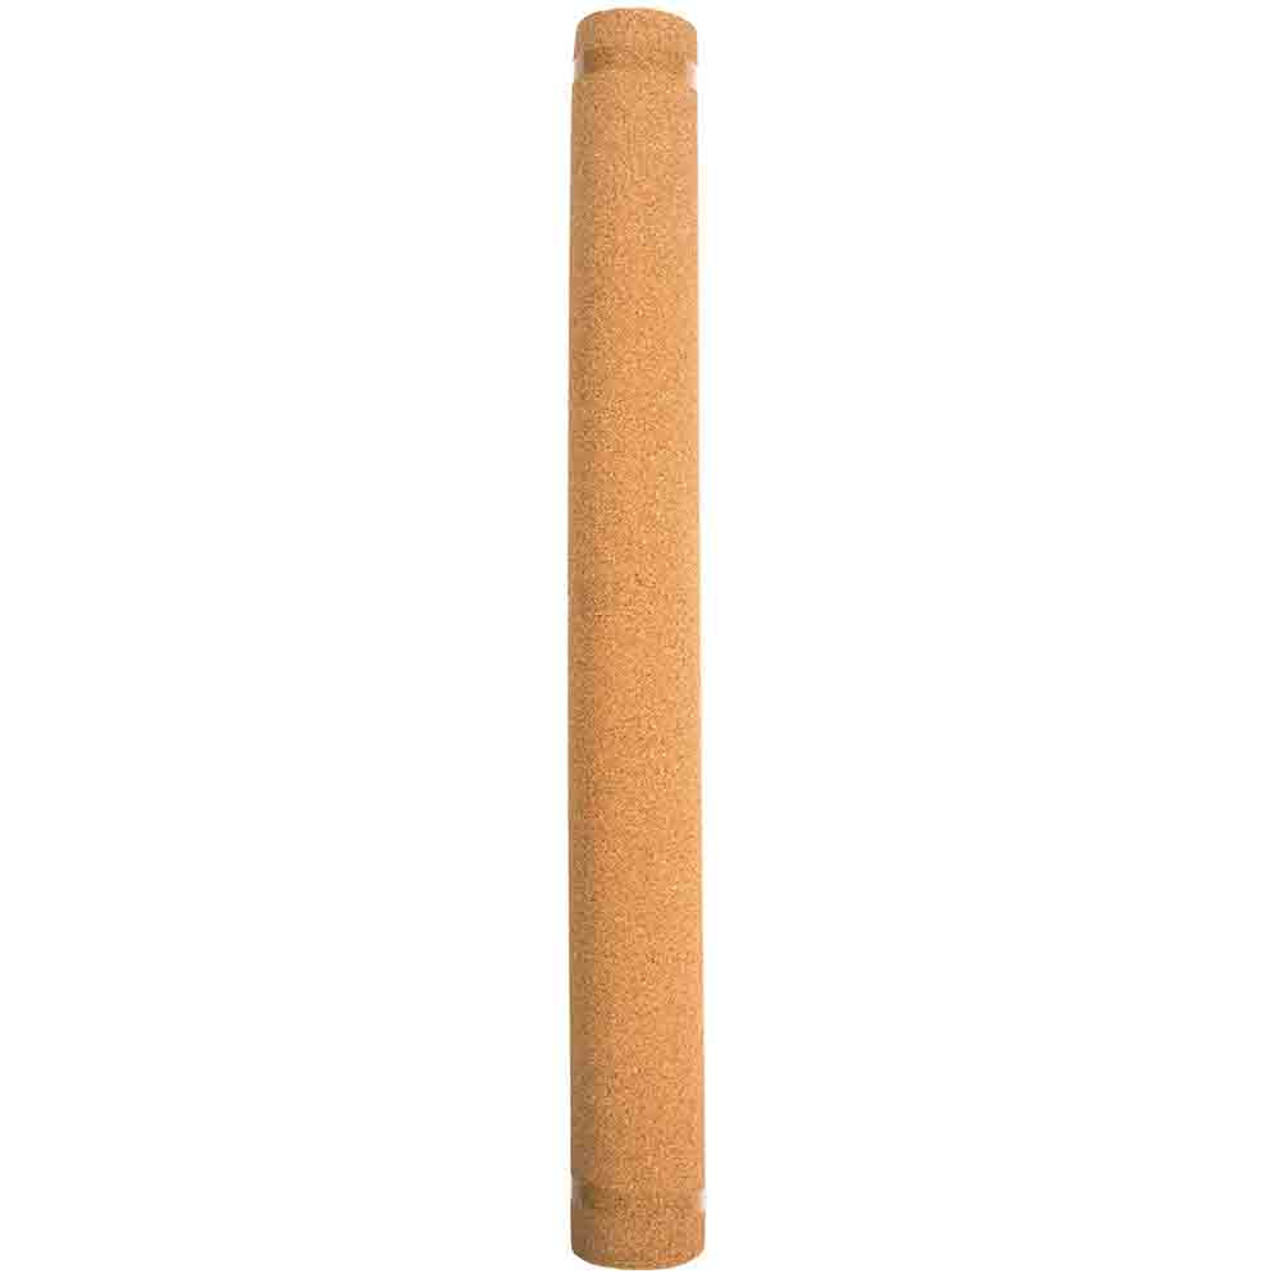 3/32 Inch Cork Roll - 24 x 48 Inches